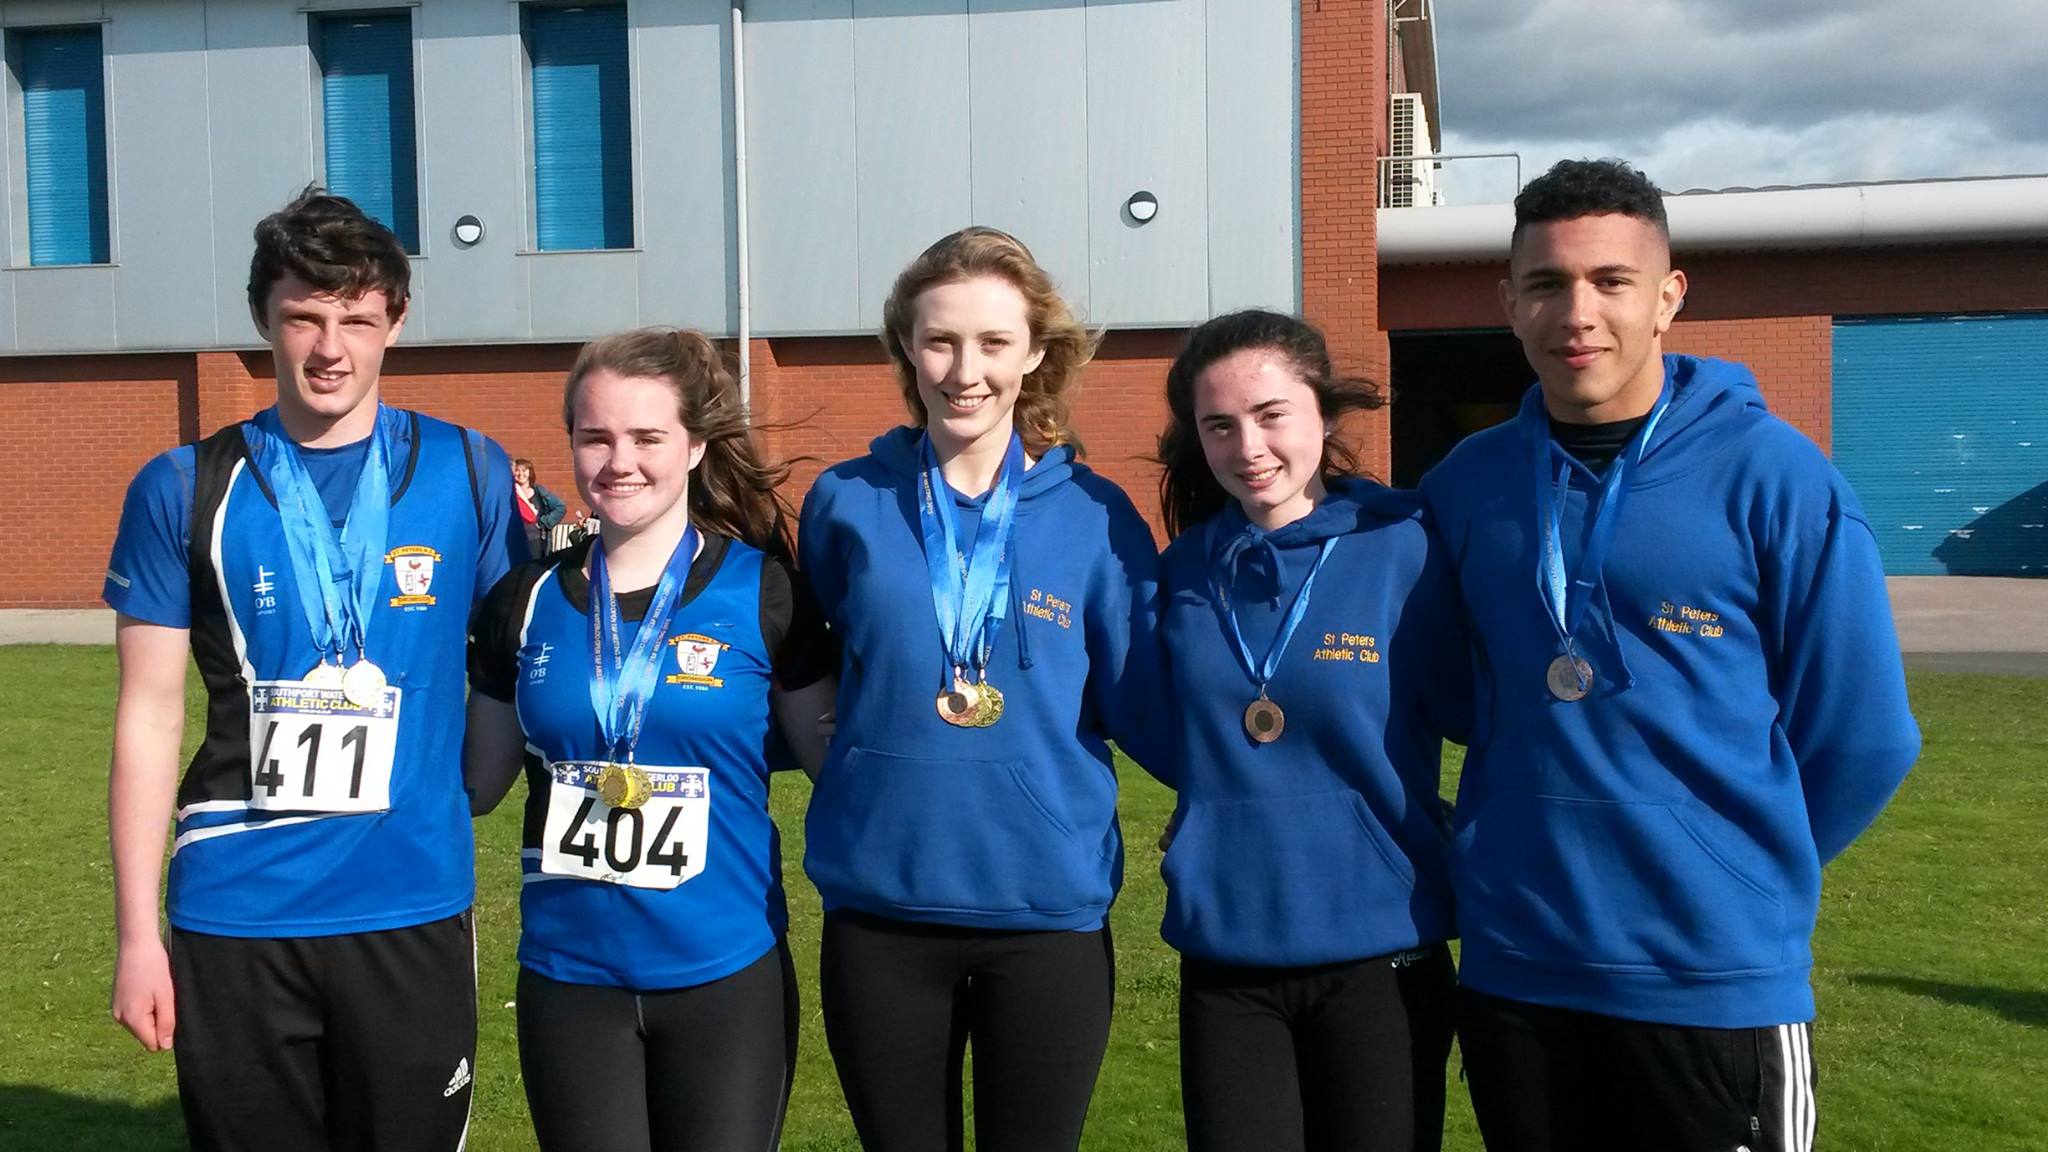 St Peter's AC teenage athletes at Southport Waterloo AC Open Meet (Liverpool, September 2015)